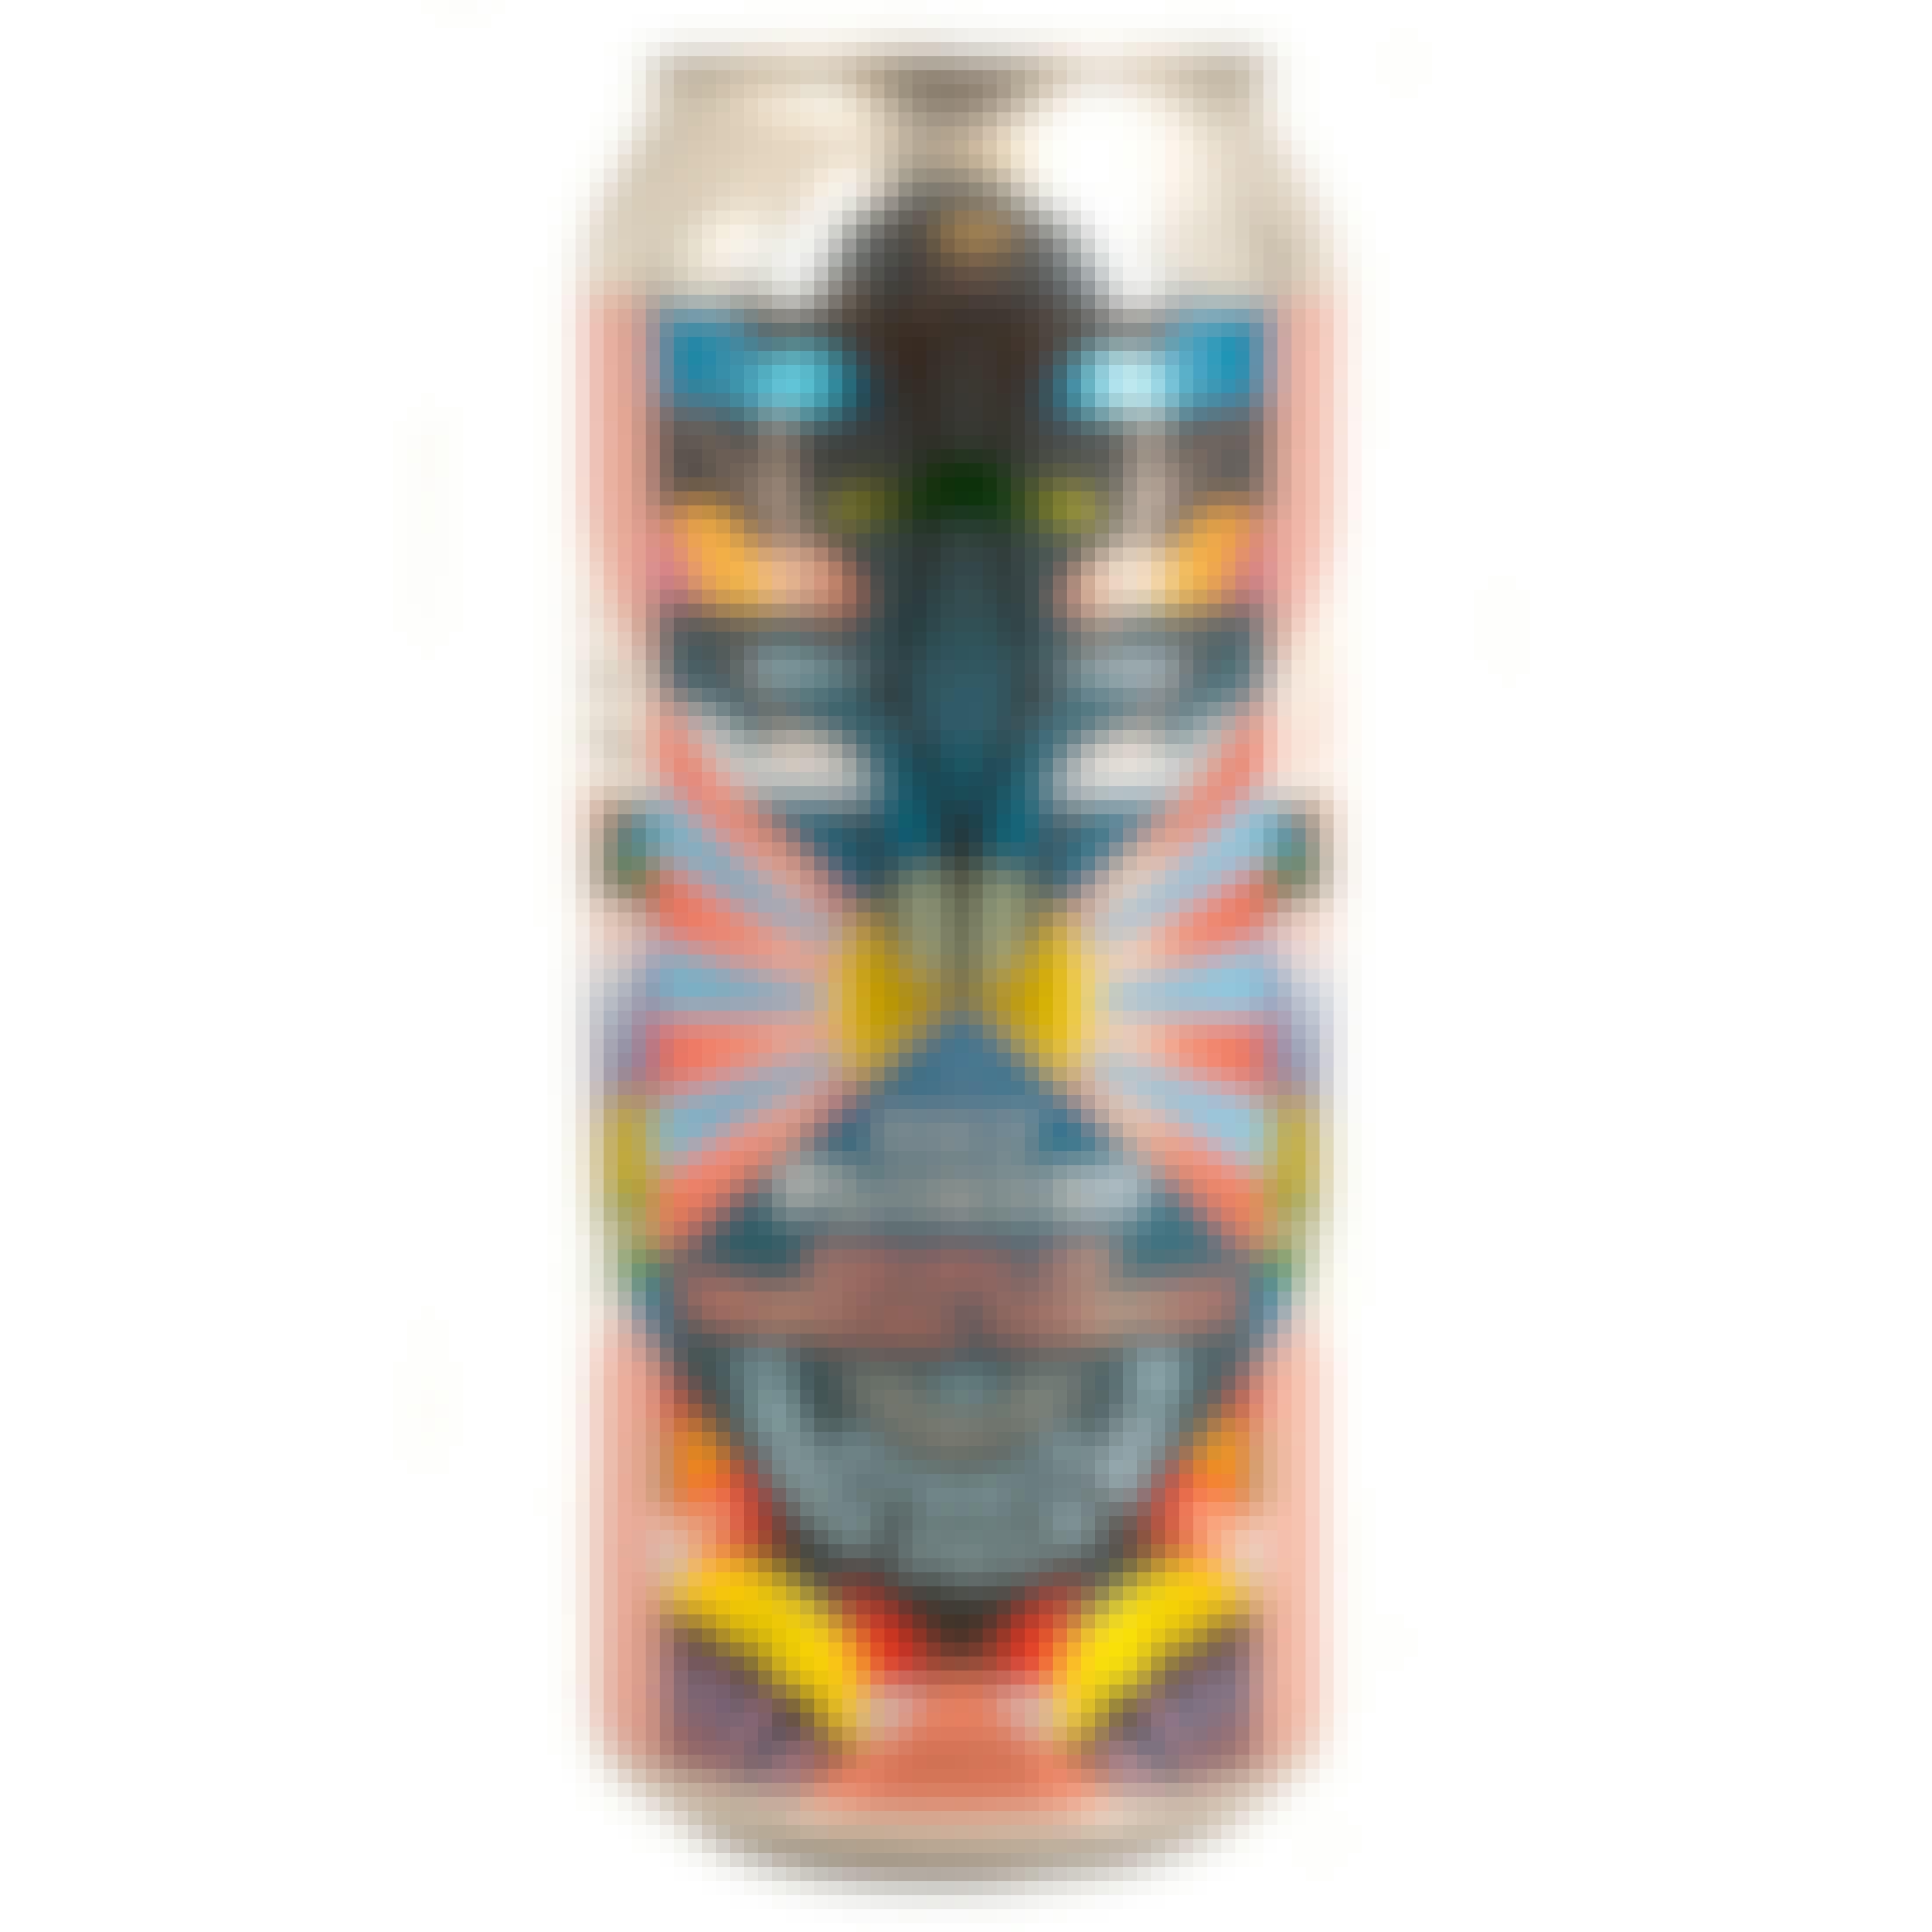 Mountains Walking Brewery Sky Flowers Hybrid Ipa 4 pack 16 oz. Can